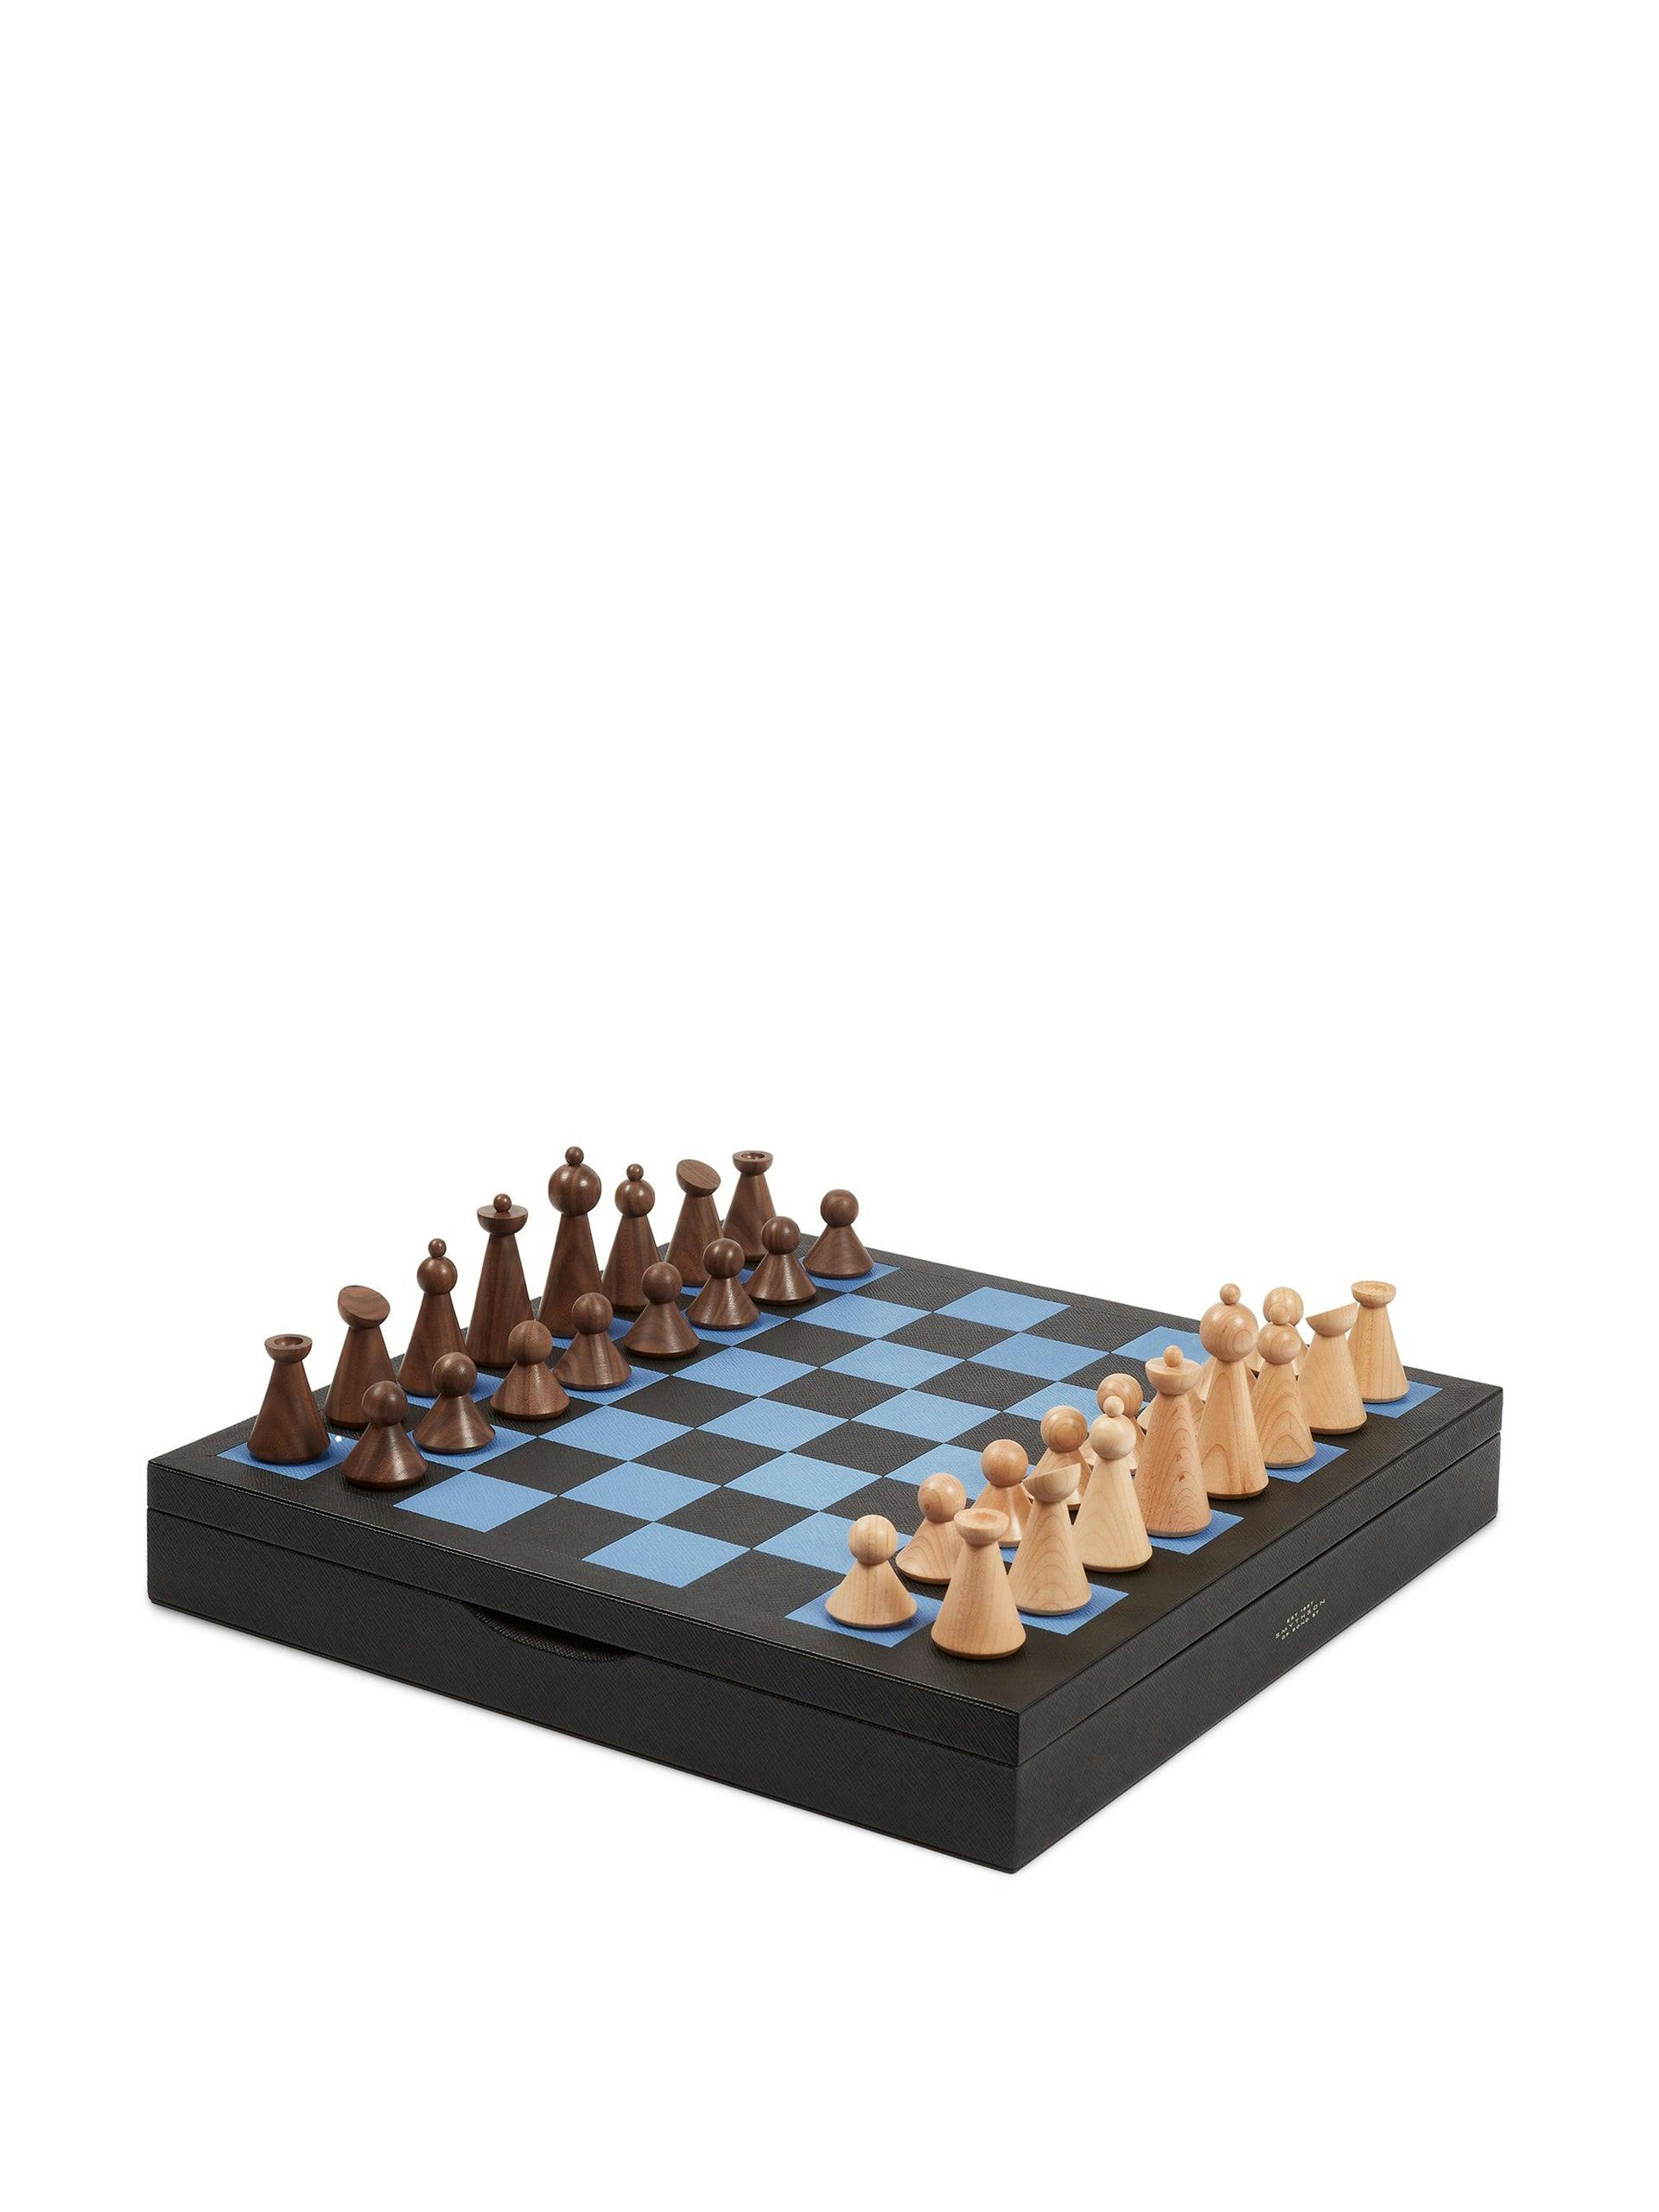 Collector's Chess set in Panama